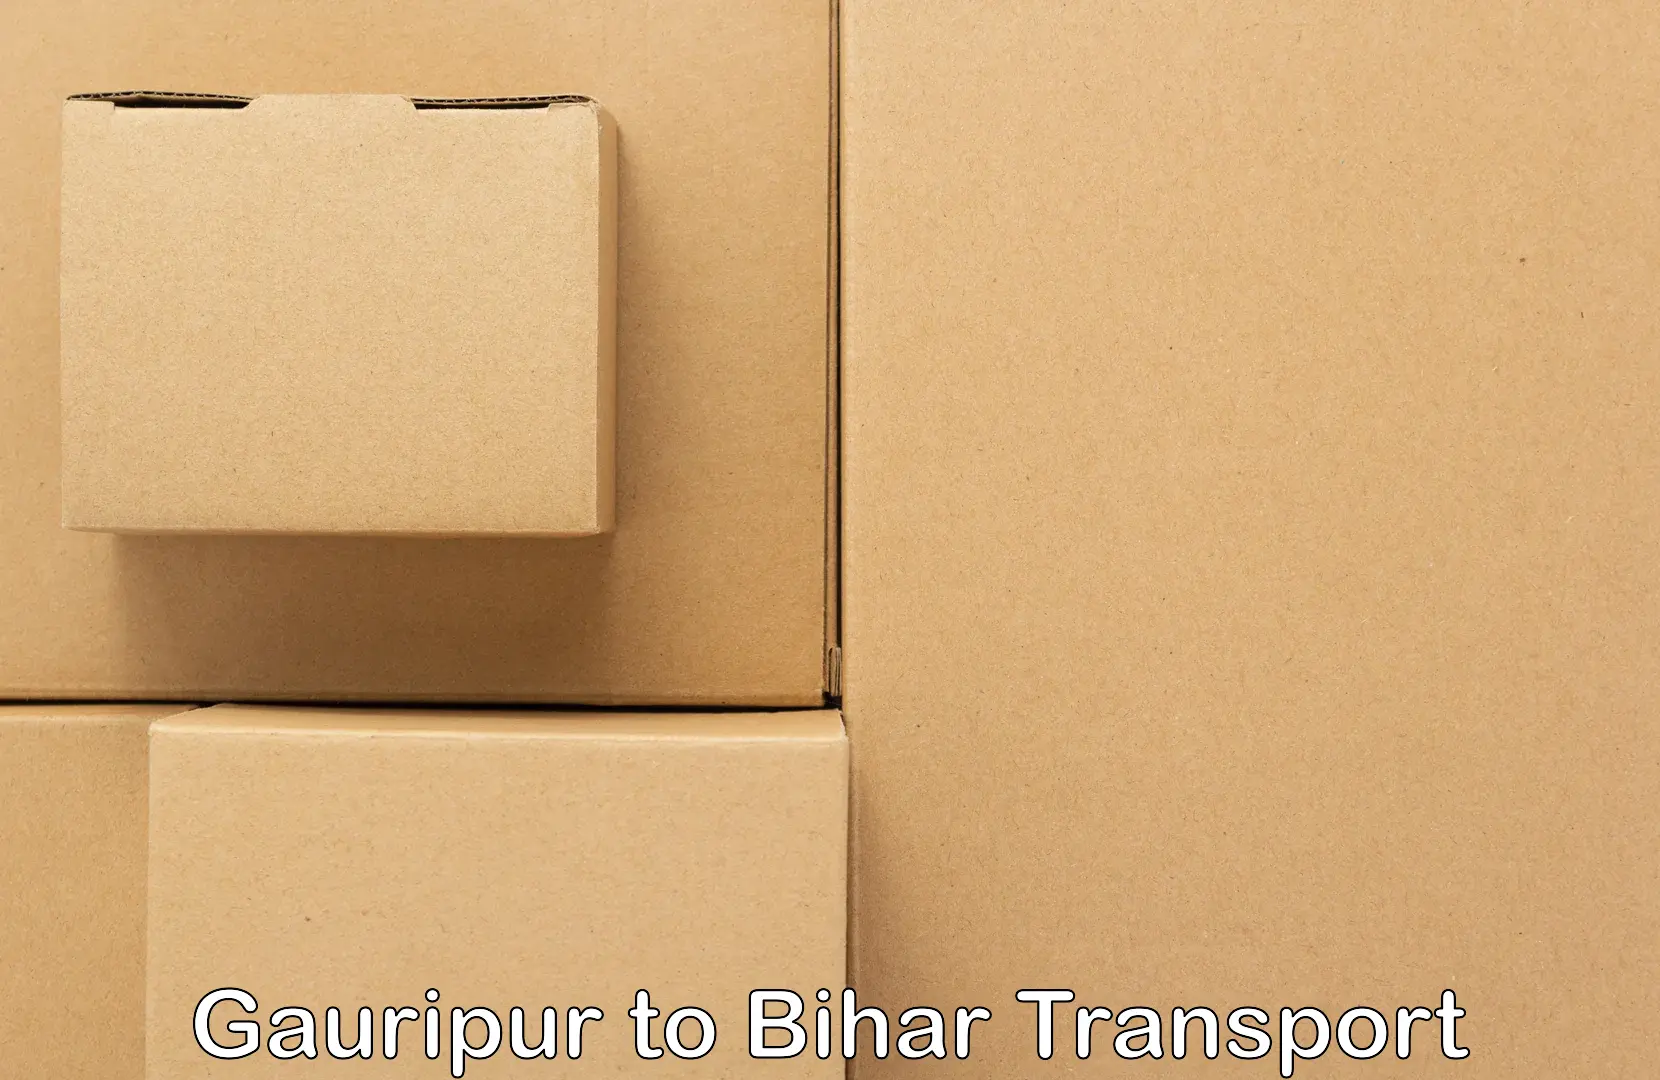 Daily parcel service transport in Gauripur to Bihar